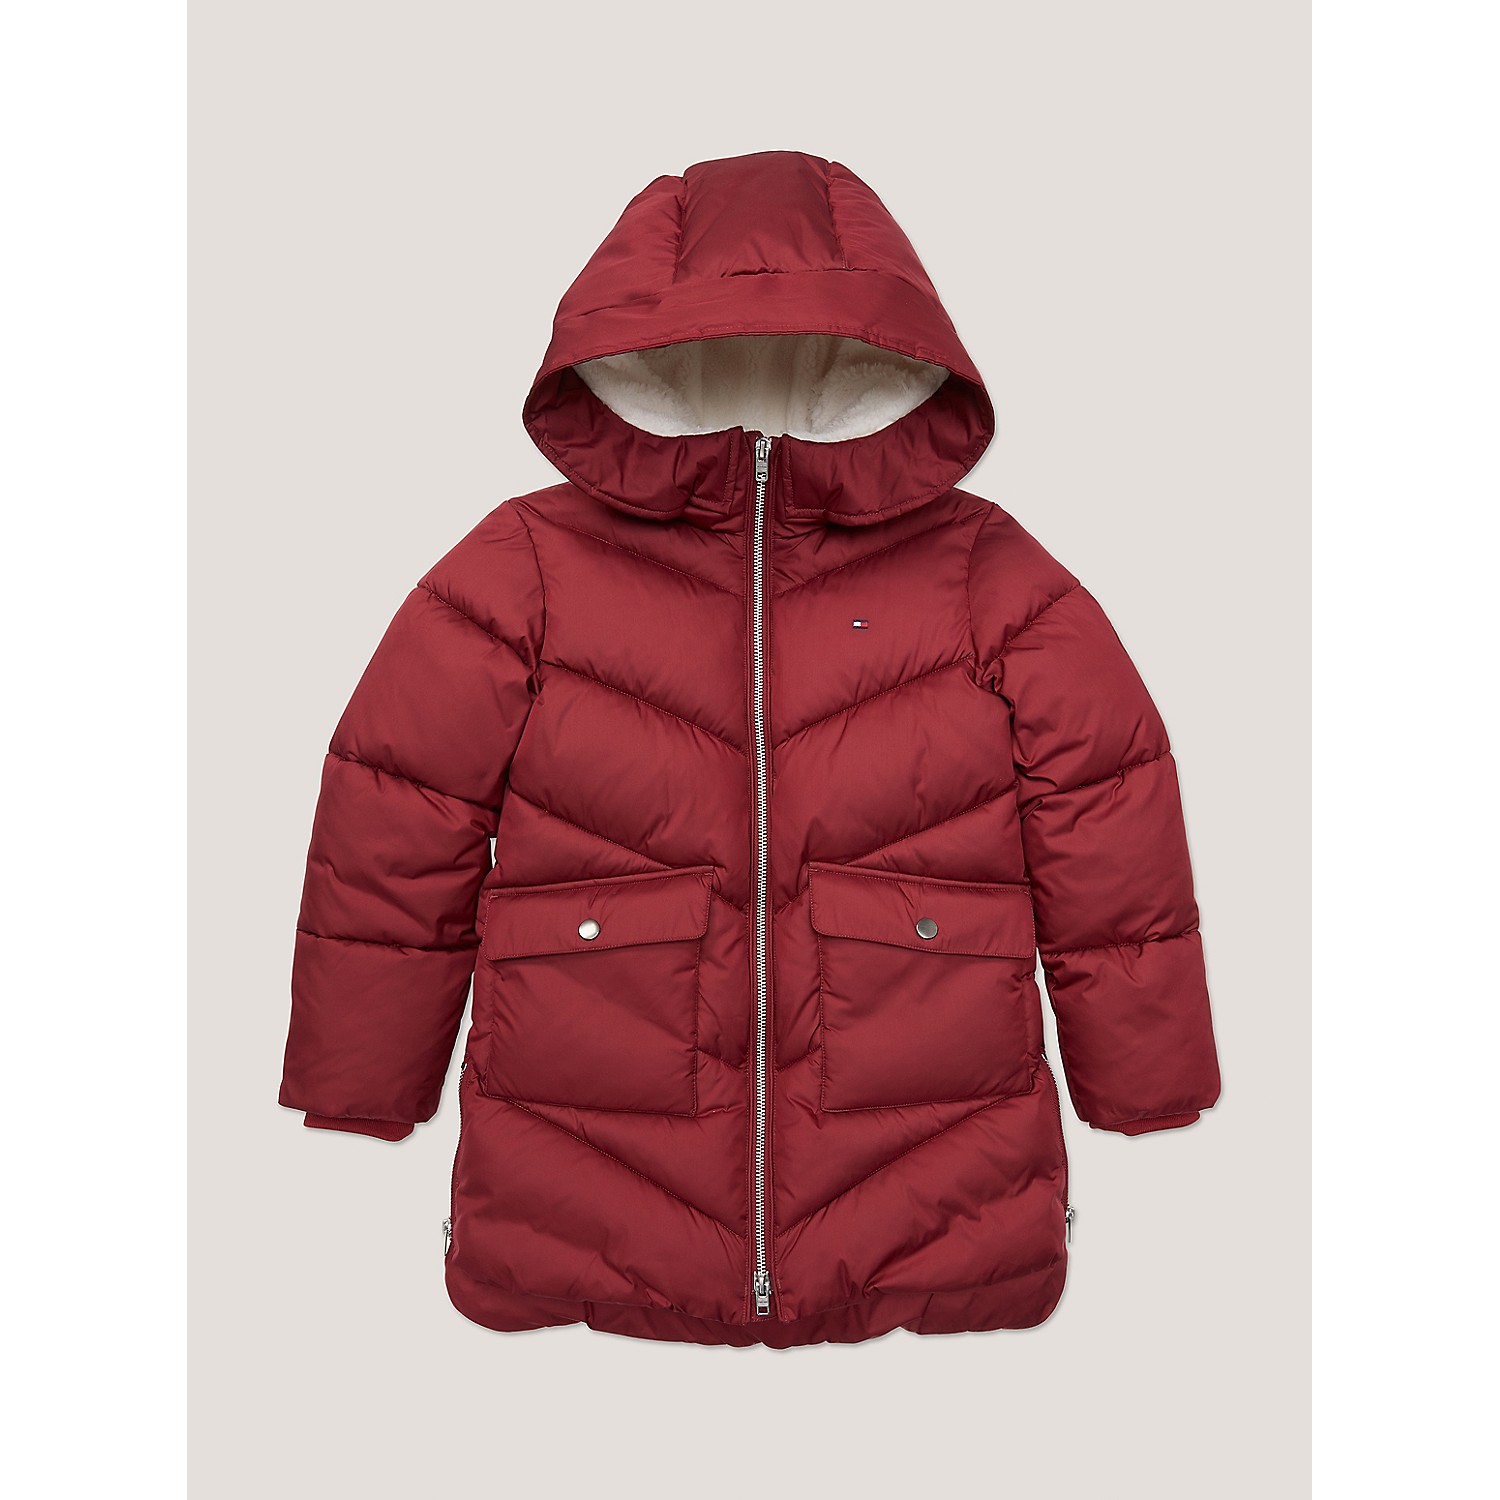 TOMMY HILFIGER Kids Teddy-Lined Long Puffer